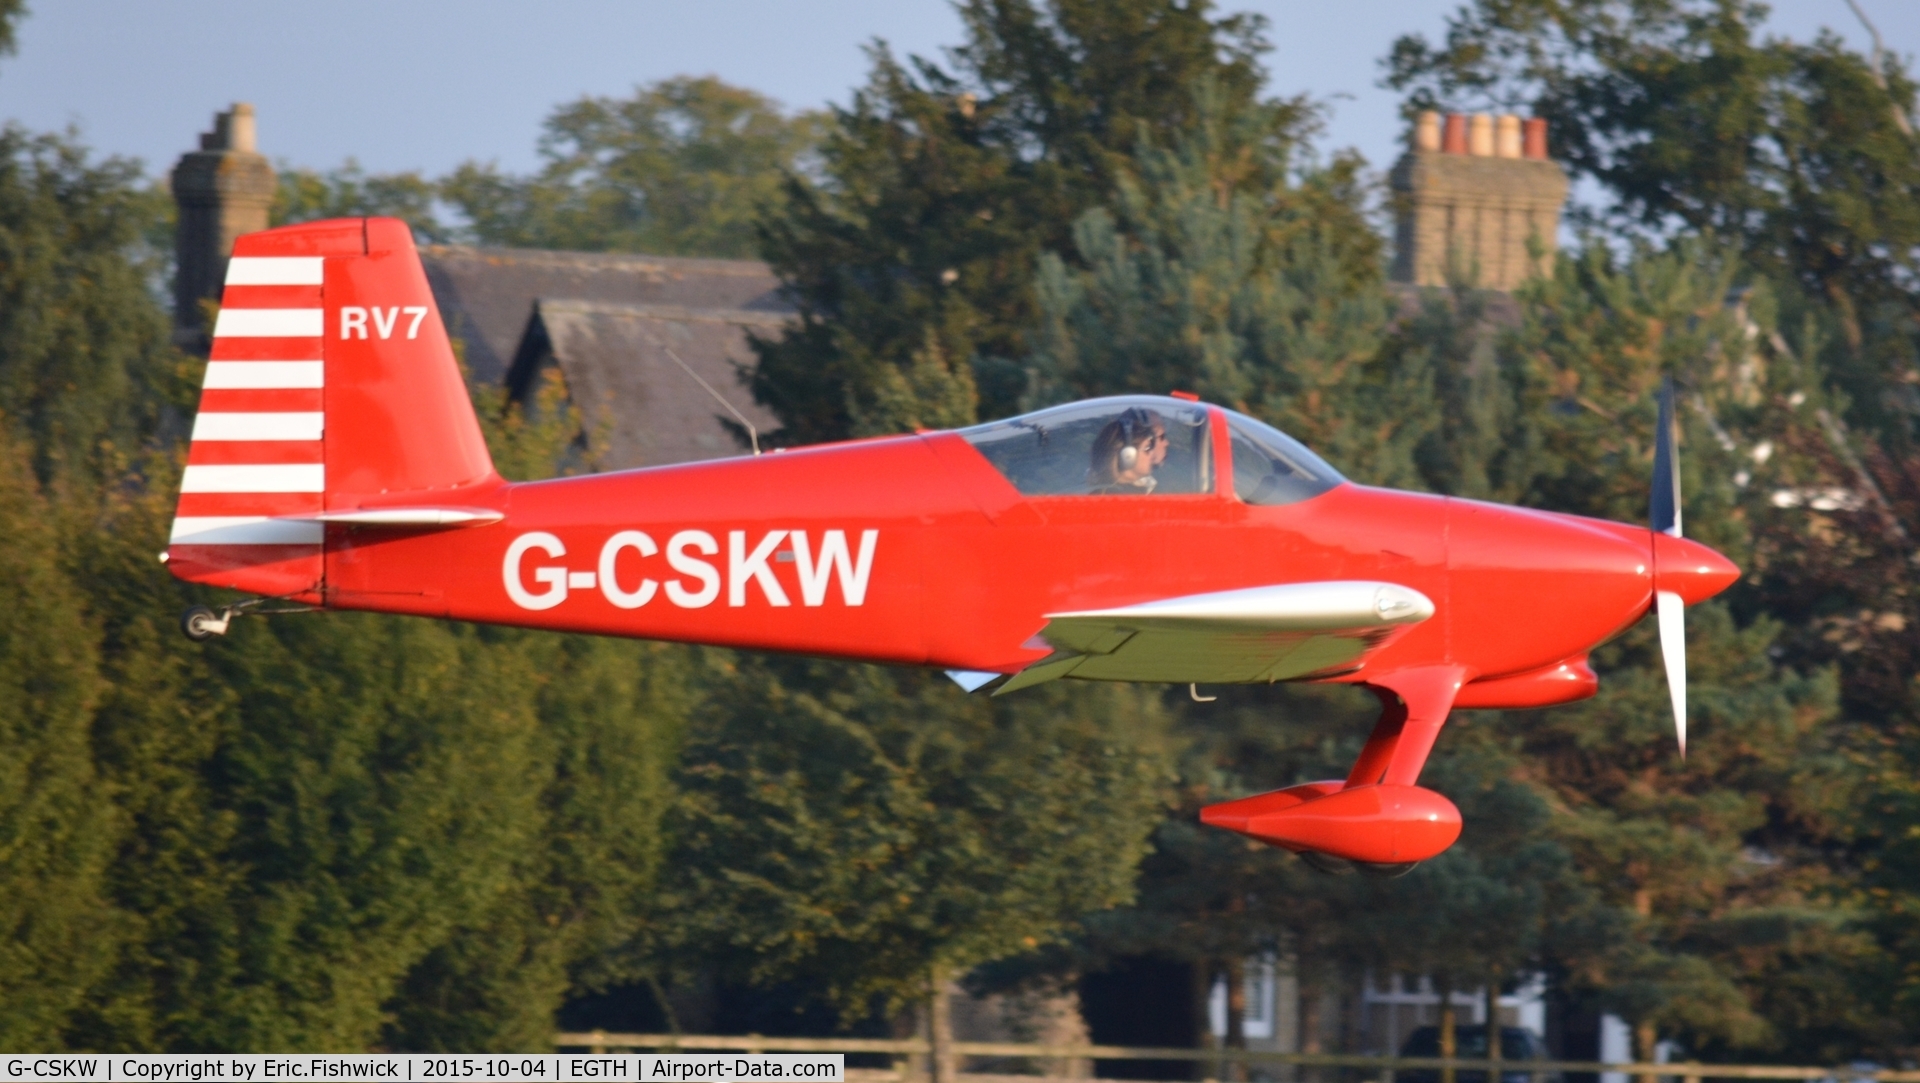 G-CSKW, 2006 Vans RV-7 C/N PFA 323-14045, 42. G-CSKW departing The Shuttleworth 'Uncovered' Airshow (Finale,) Oct. 2015.